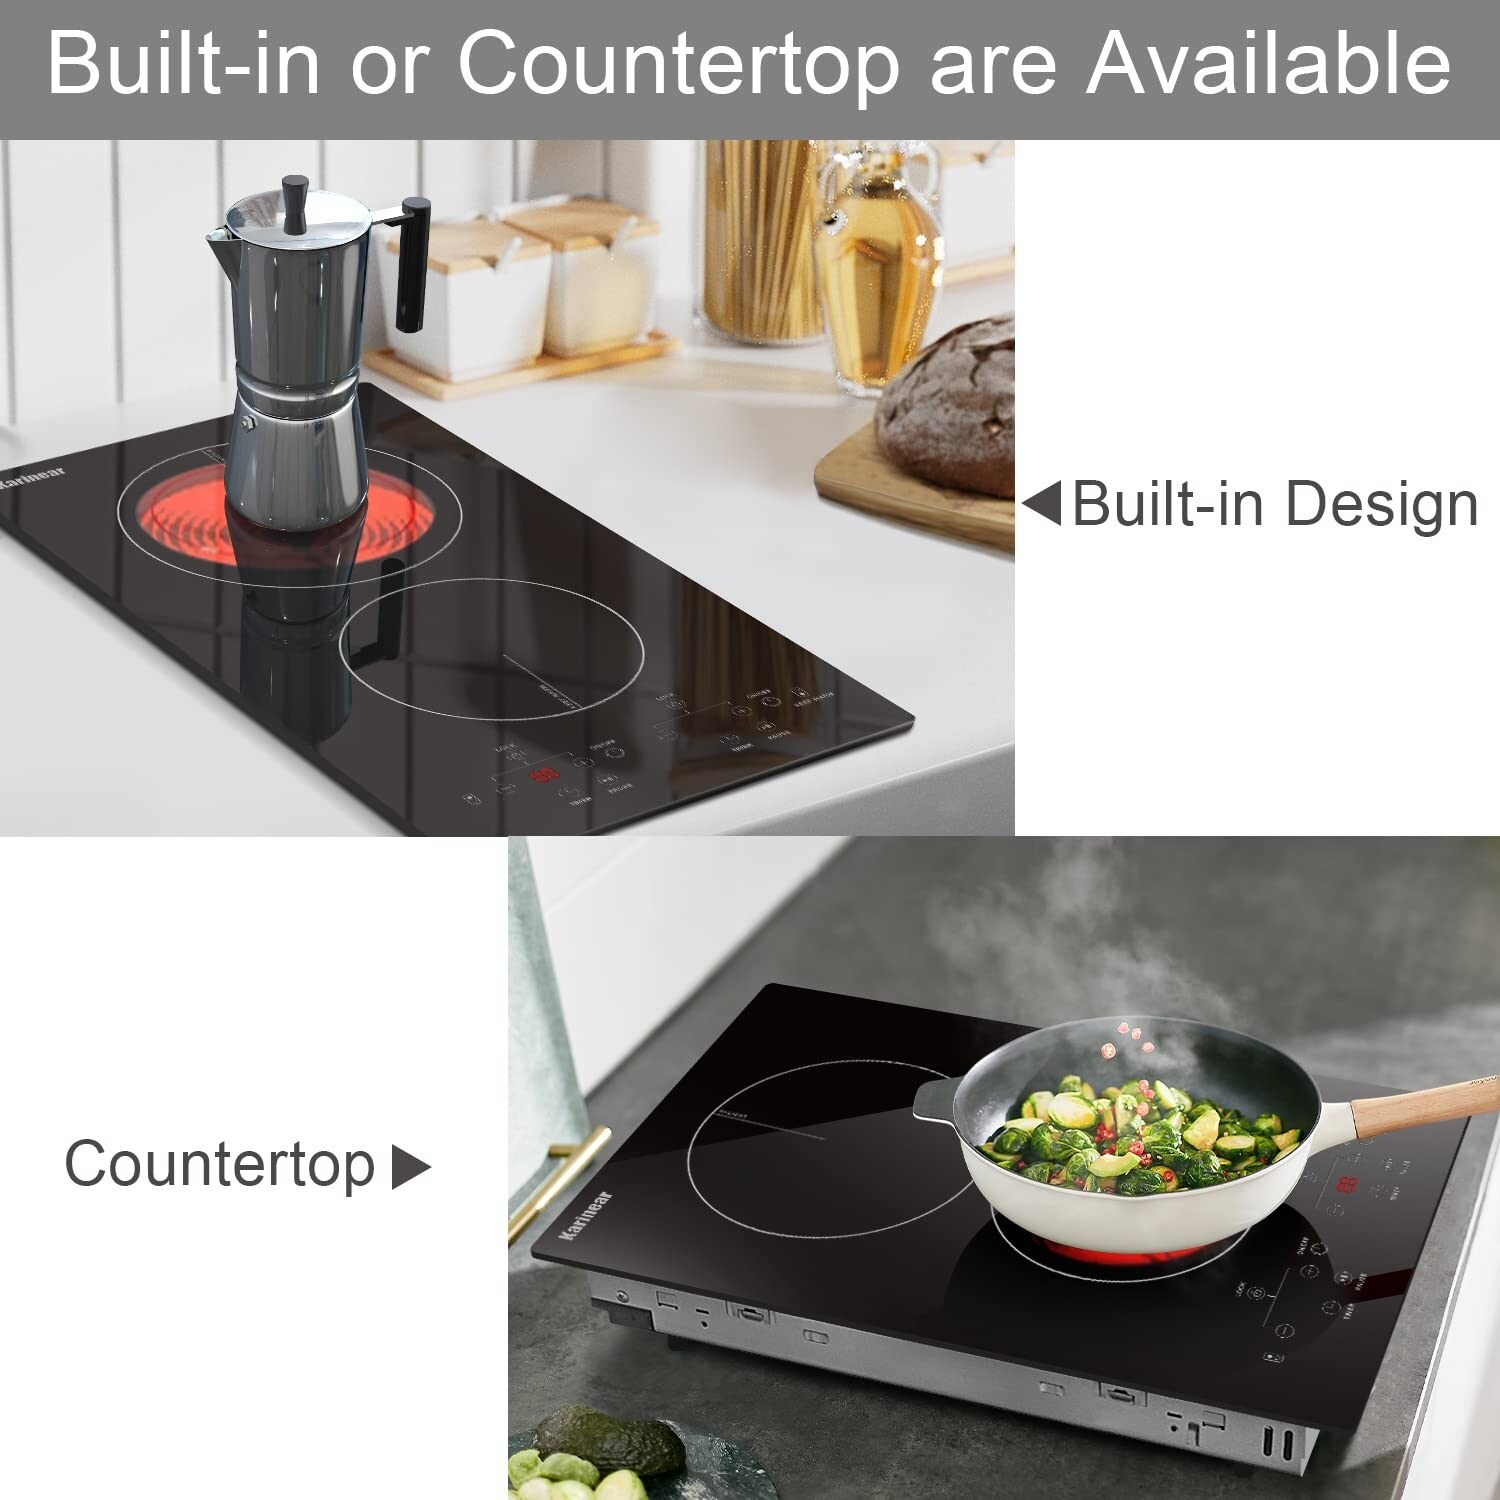 https://ak1.ostkcdn.com/images/products/is/images/direct/8735d618e9a6f262d1049750e3c11f05f6916284/2-Burners-Electric-Cooktop%2C-120v-Plug-in-Ceramic-Cooktop%2C-12-Inch-Countertop-Built-in-Electric-Stove-Top-with-Child-Safety-Lock.jpg